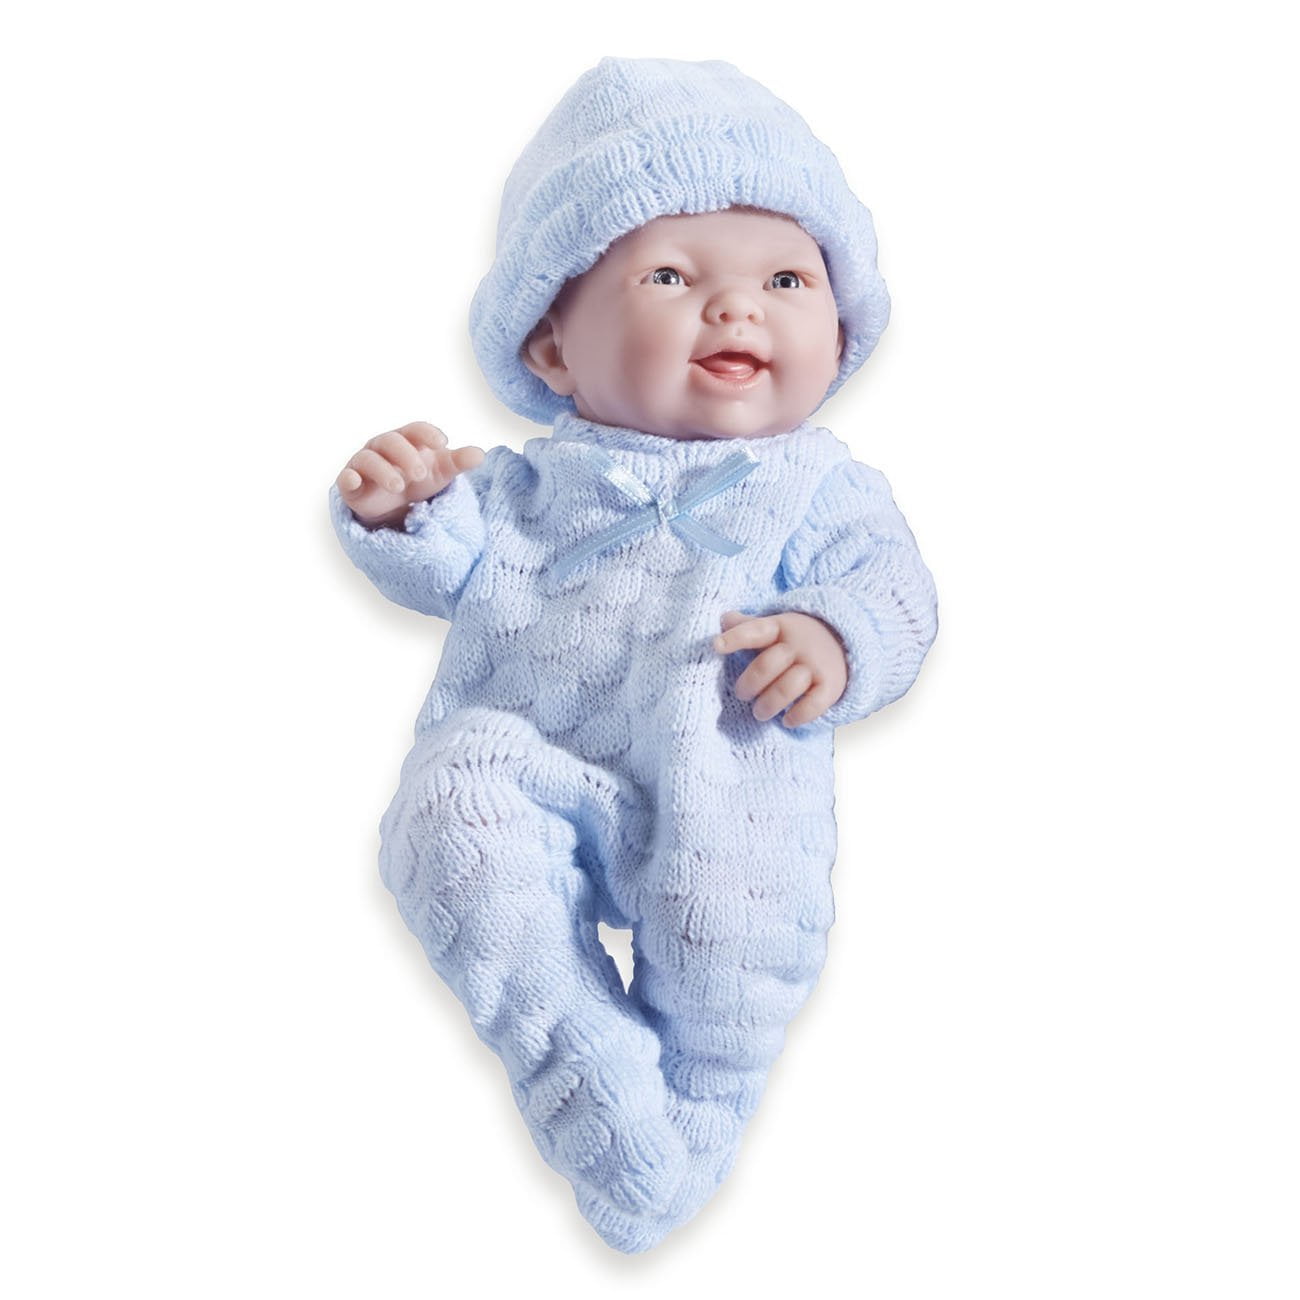 17 Inch Real Boy Doll With Blue Layette Berenguer La Newborn 18108 